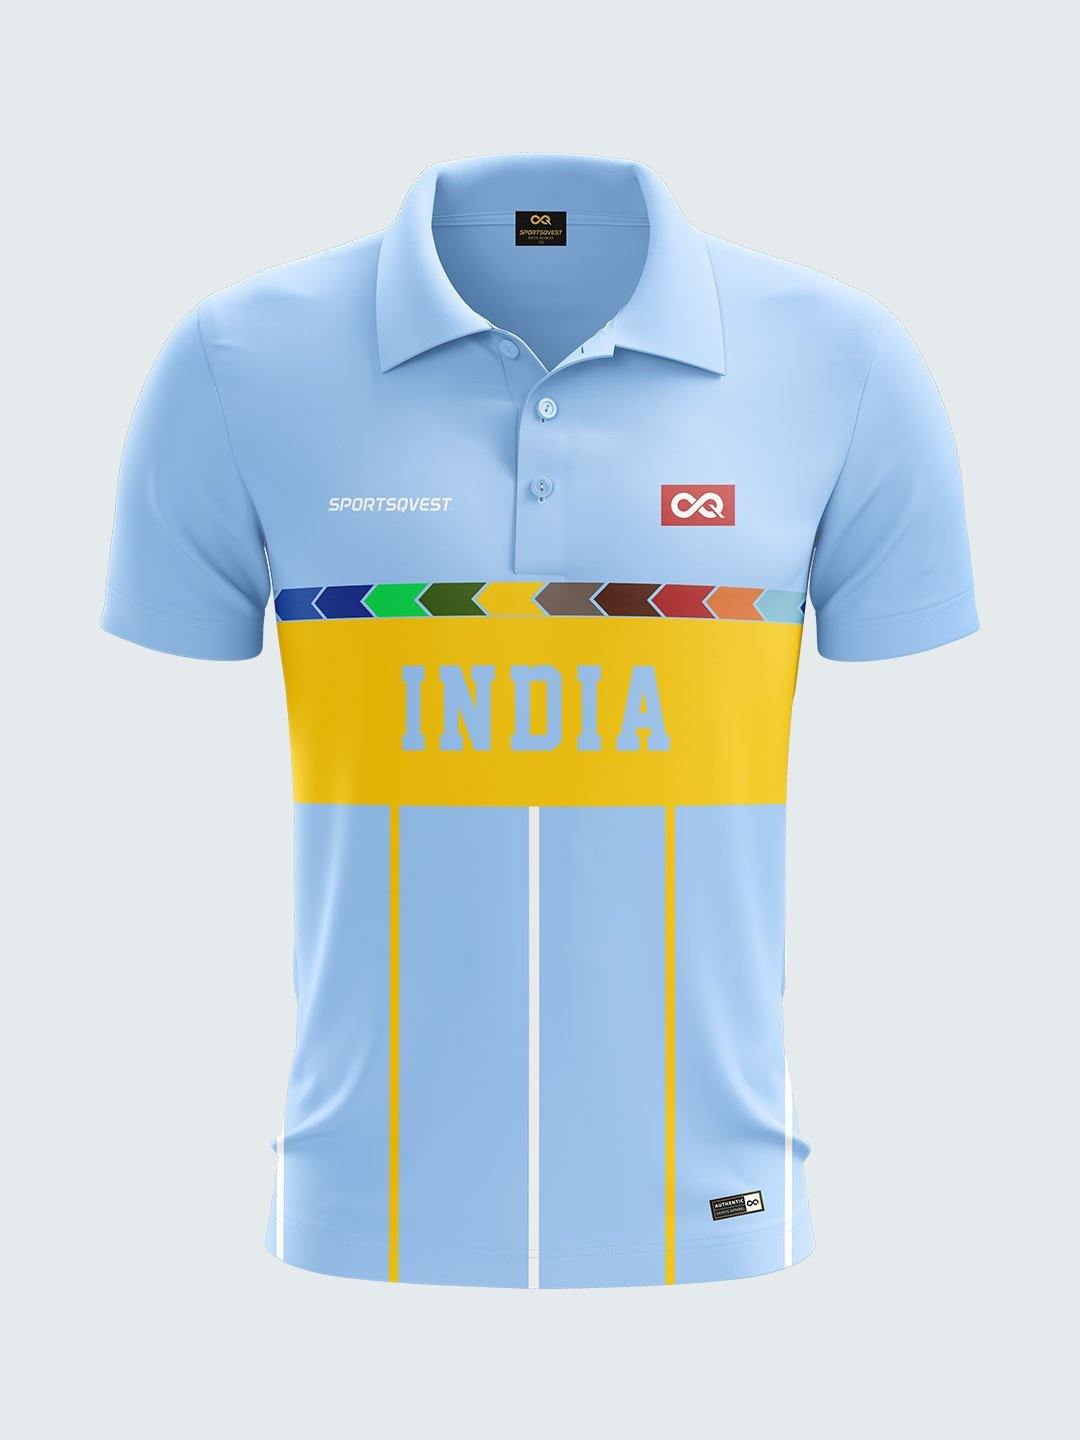 by indian cricket jersey